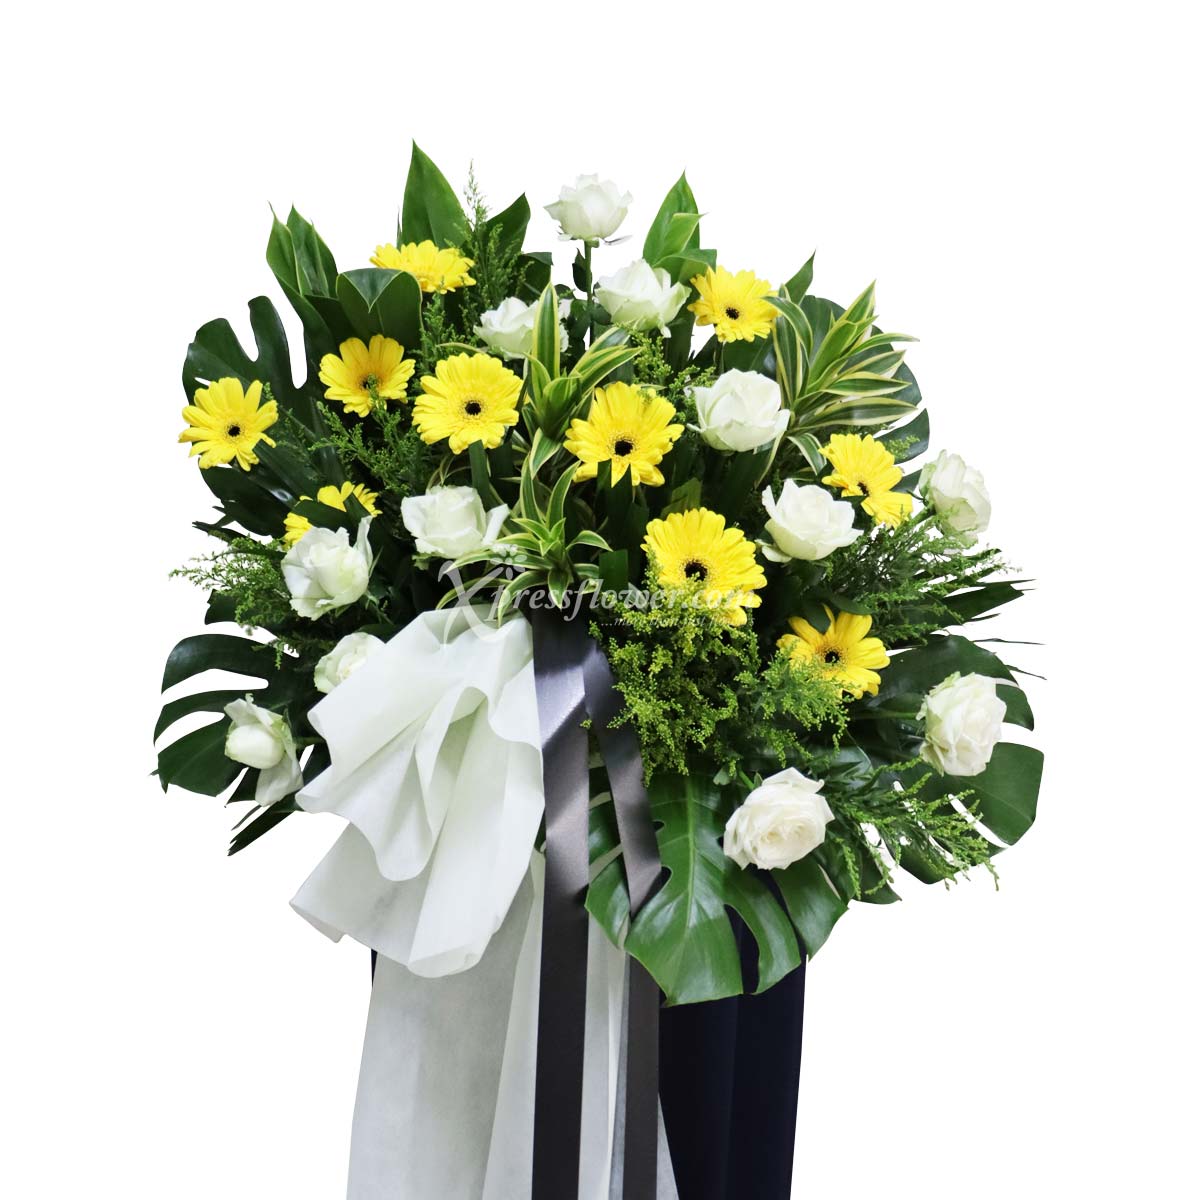 Thoughtful Reverence (Funeral Condolence Flower Wreath)